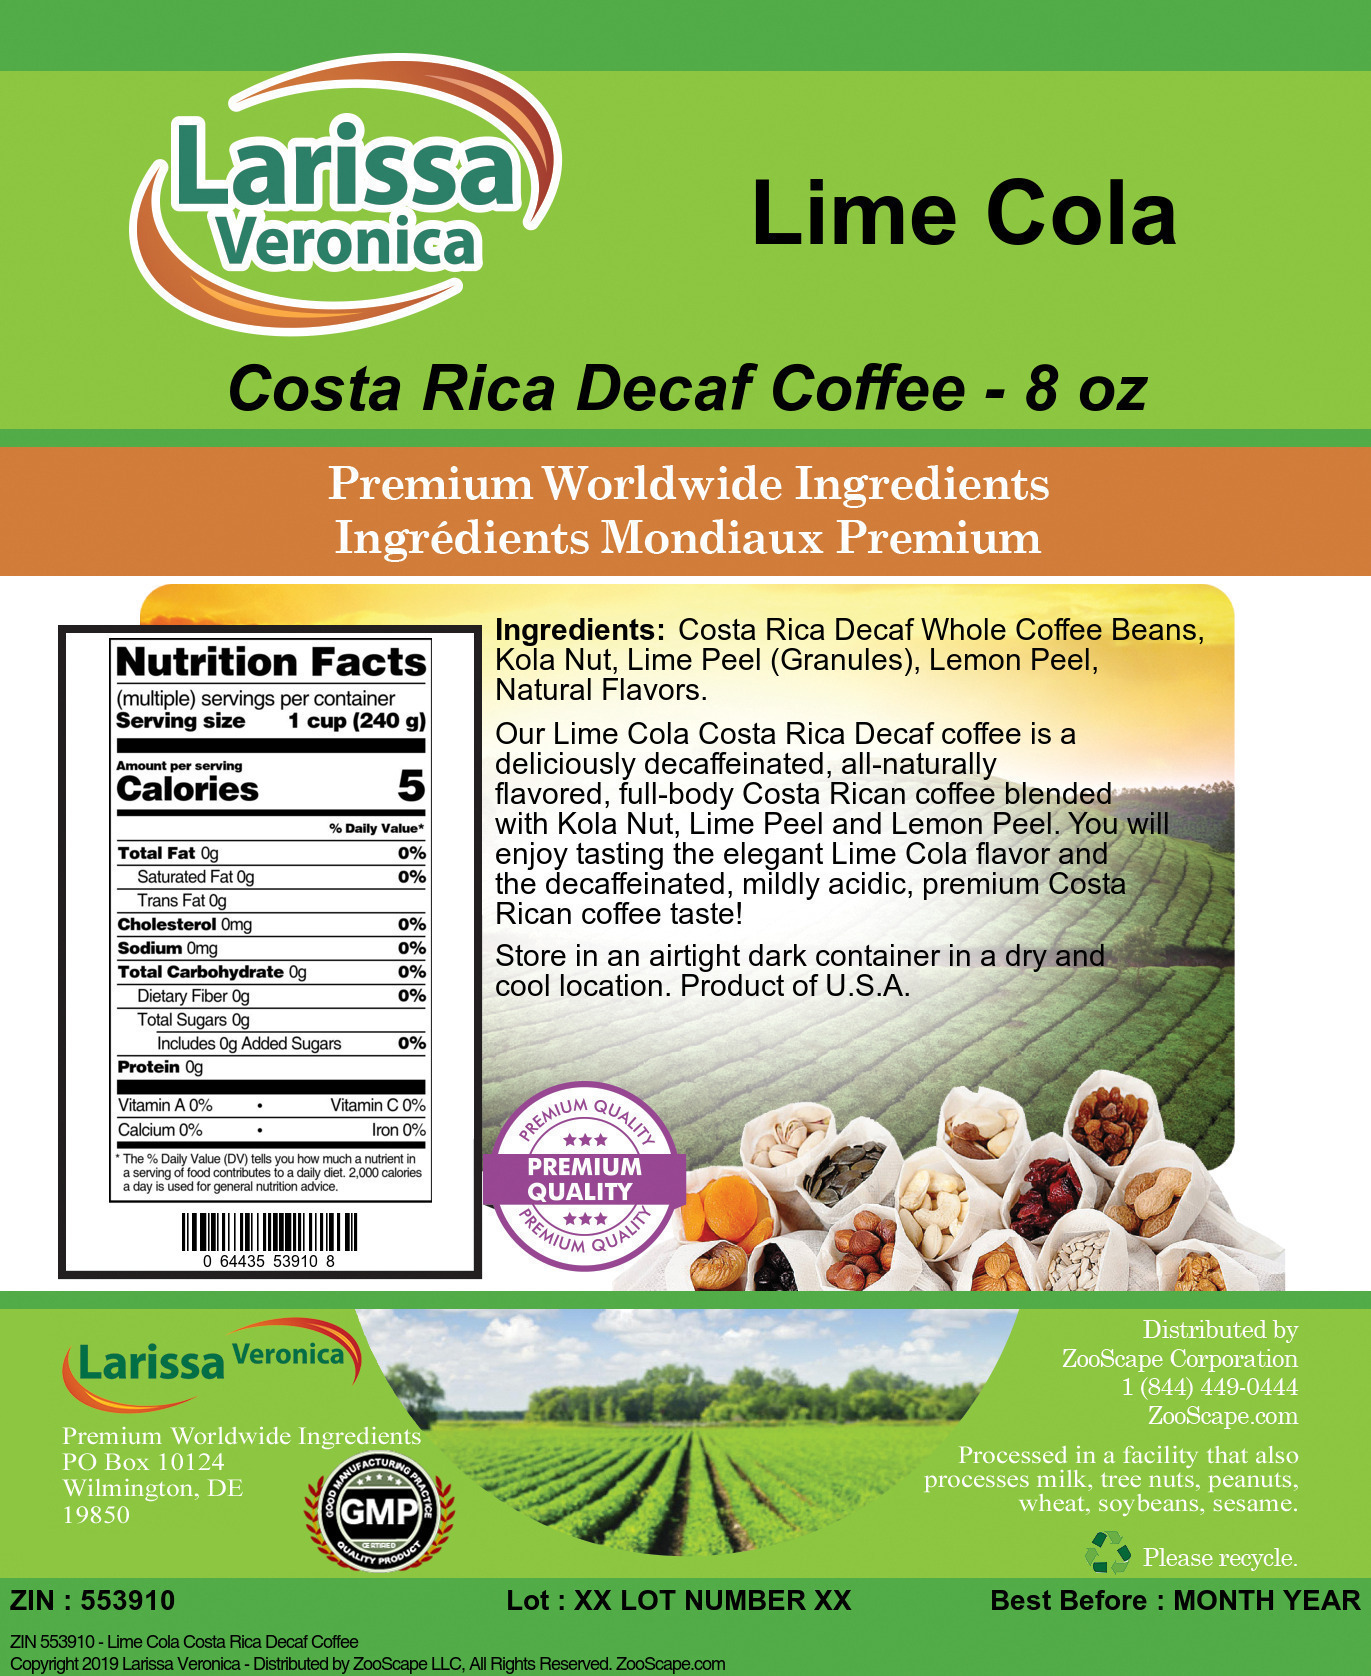 Lime Cola Costa Rica Decaf Coffee - Label